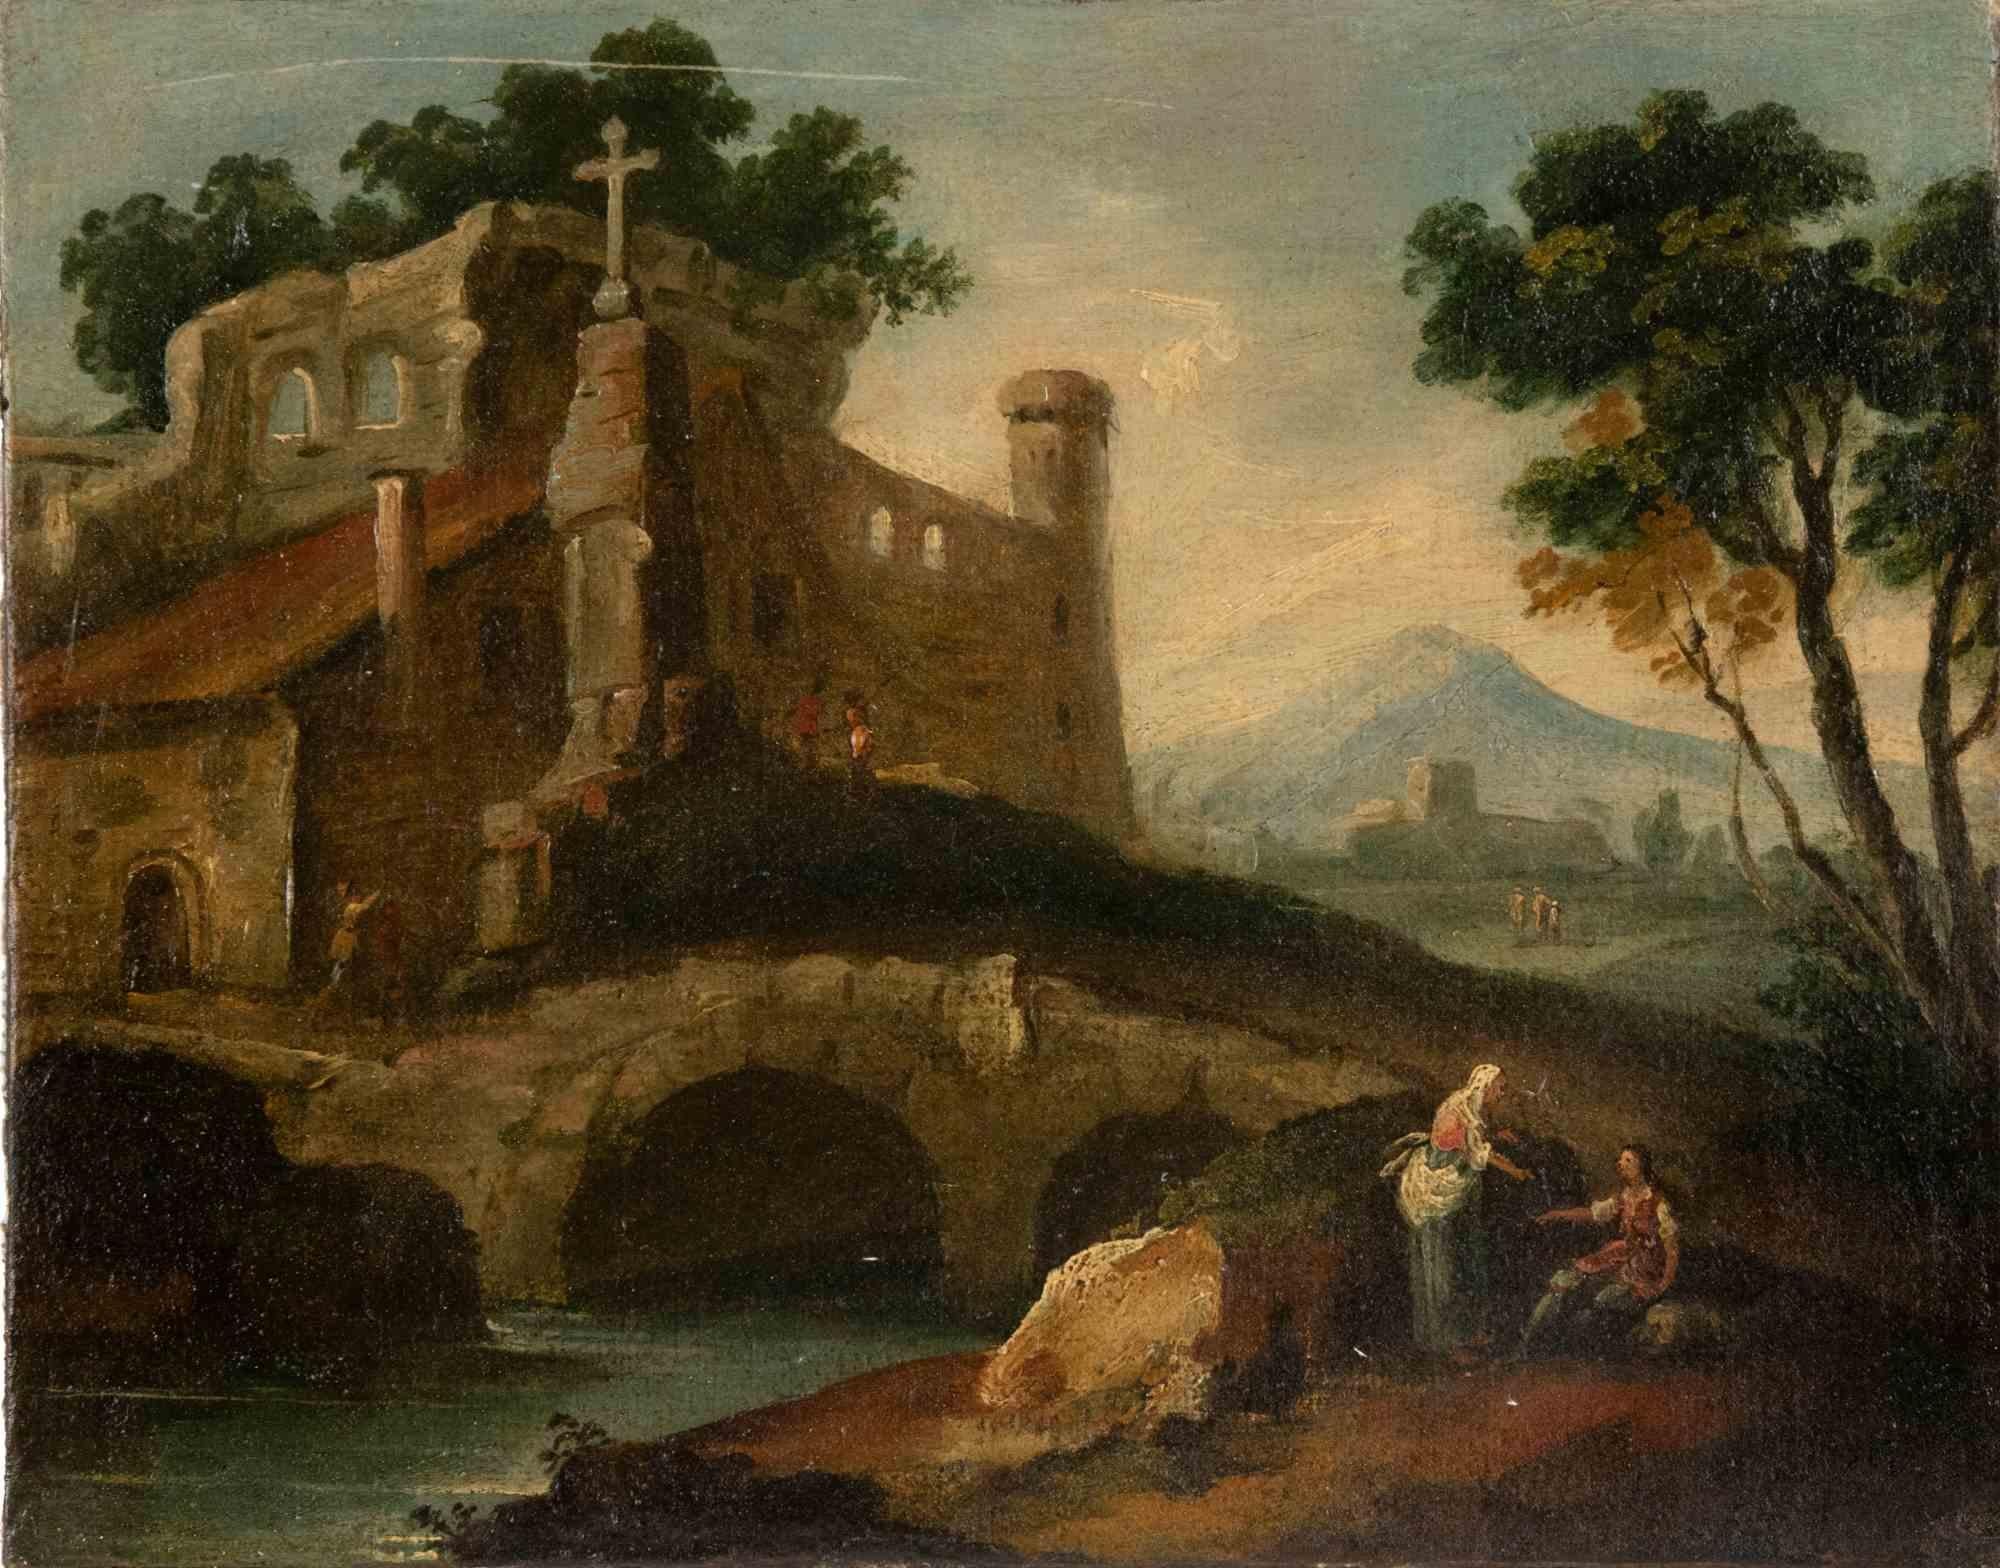 River Landscape with Bystanders - Oil on canvas - 18th Century